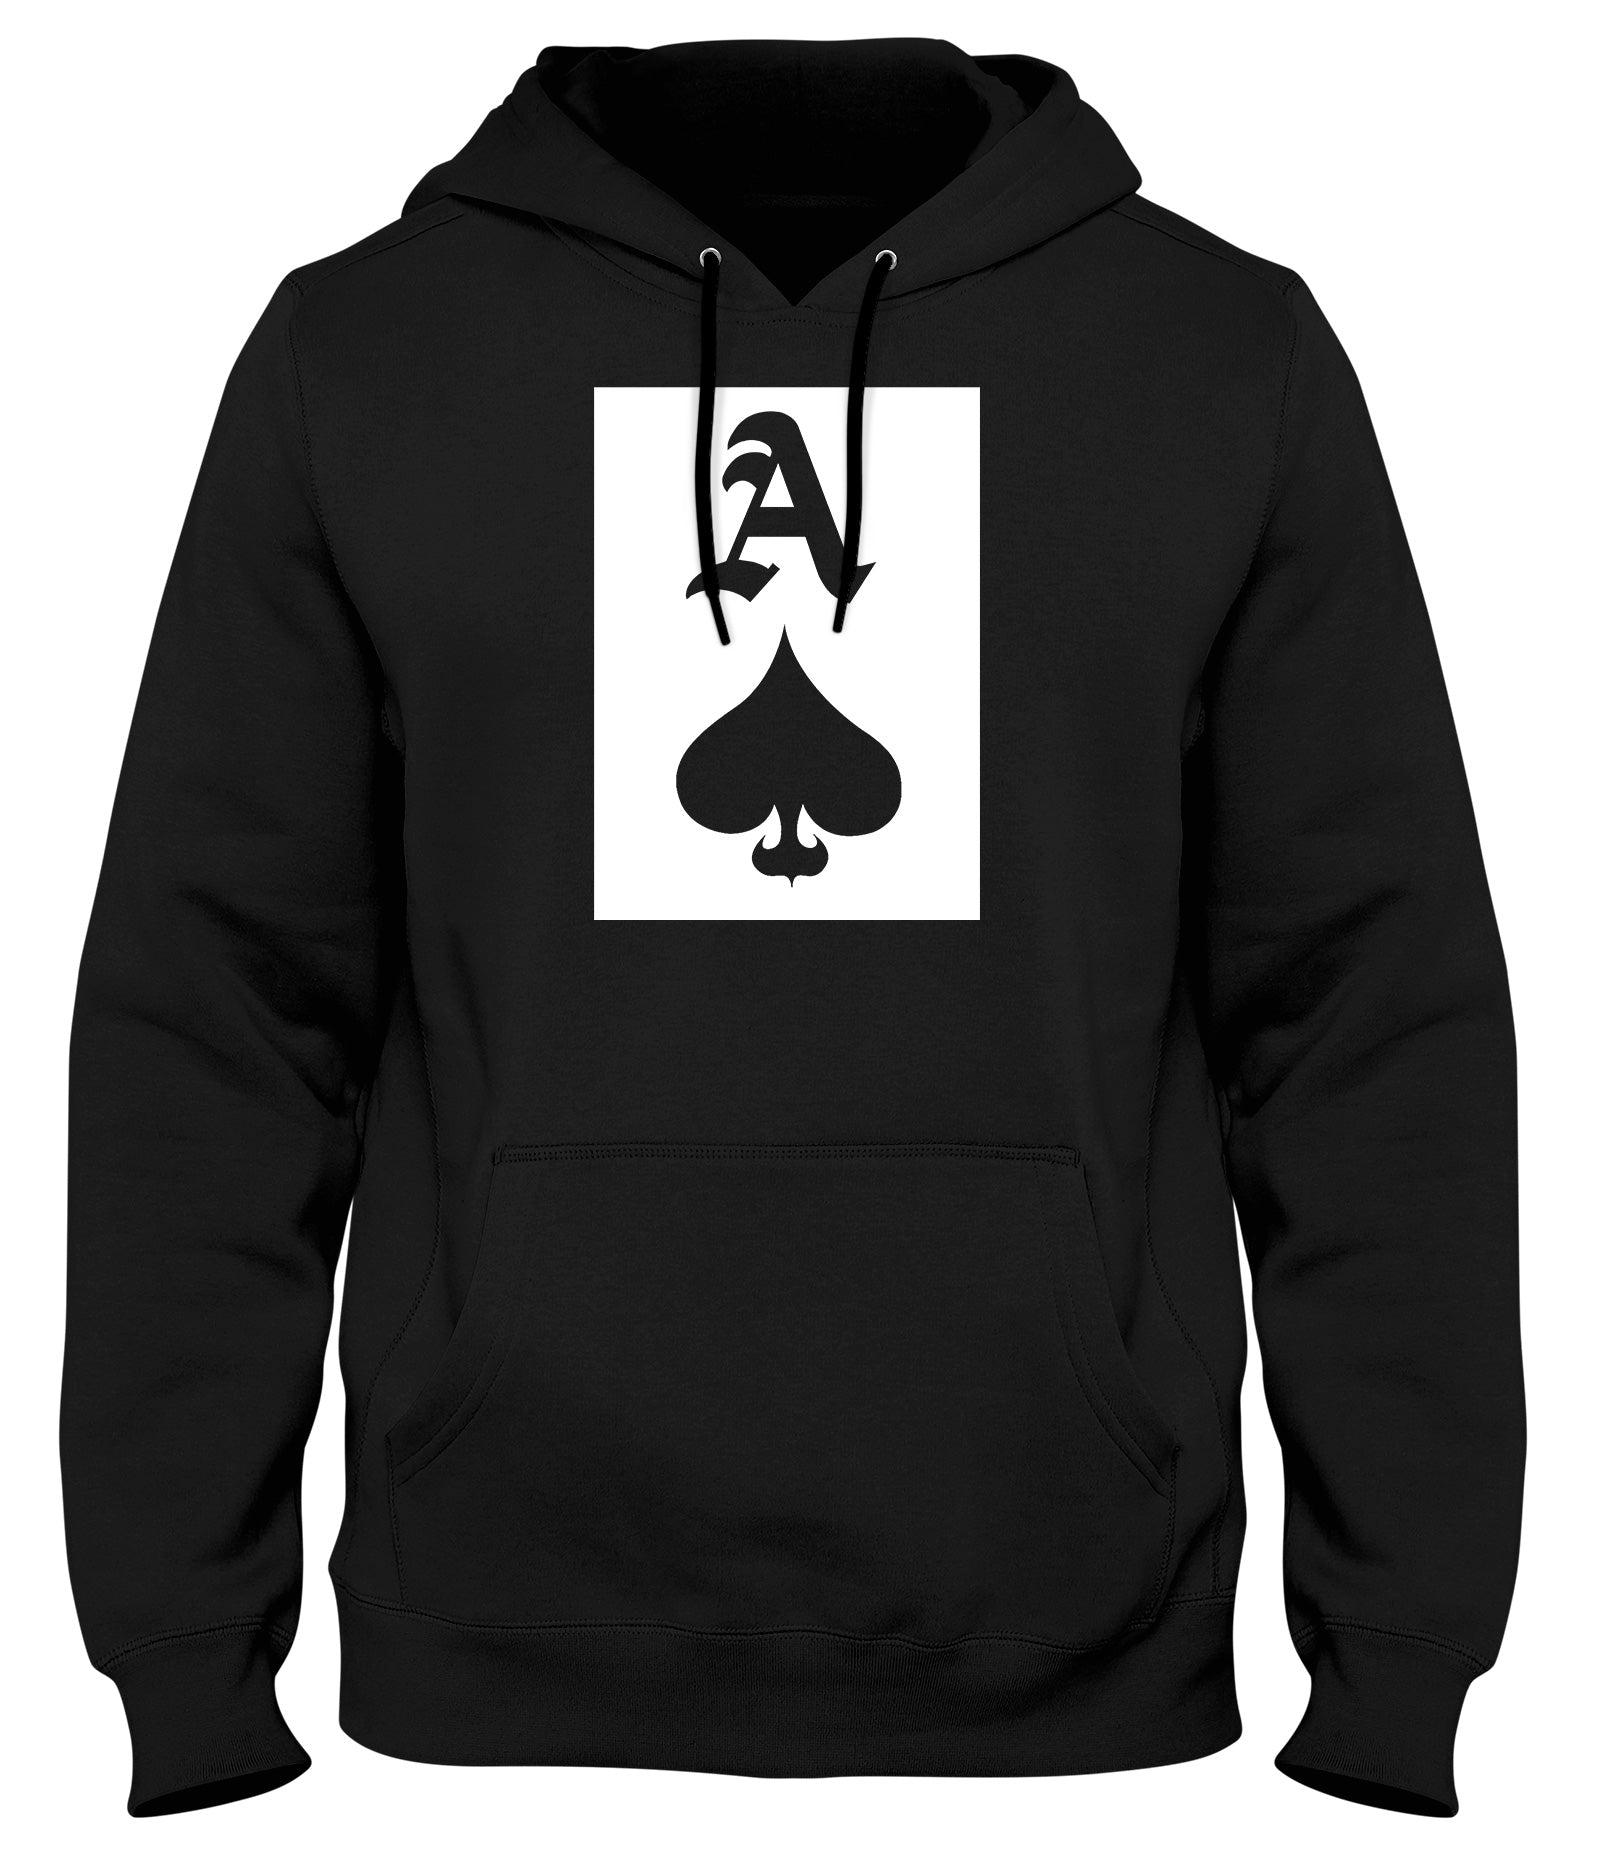 ACE OF SPADES MENS WOMENS UNISEX FUNNY HOODIE